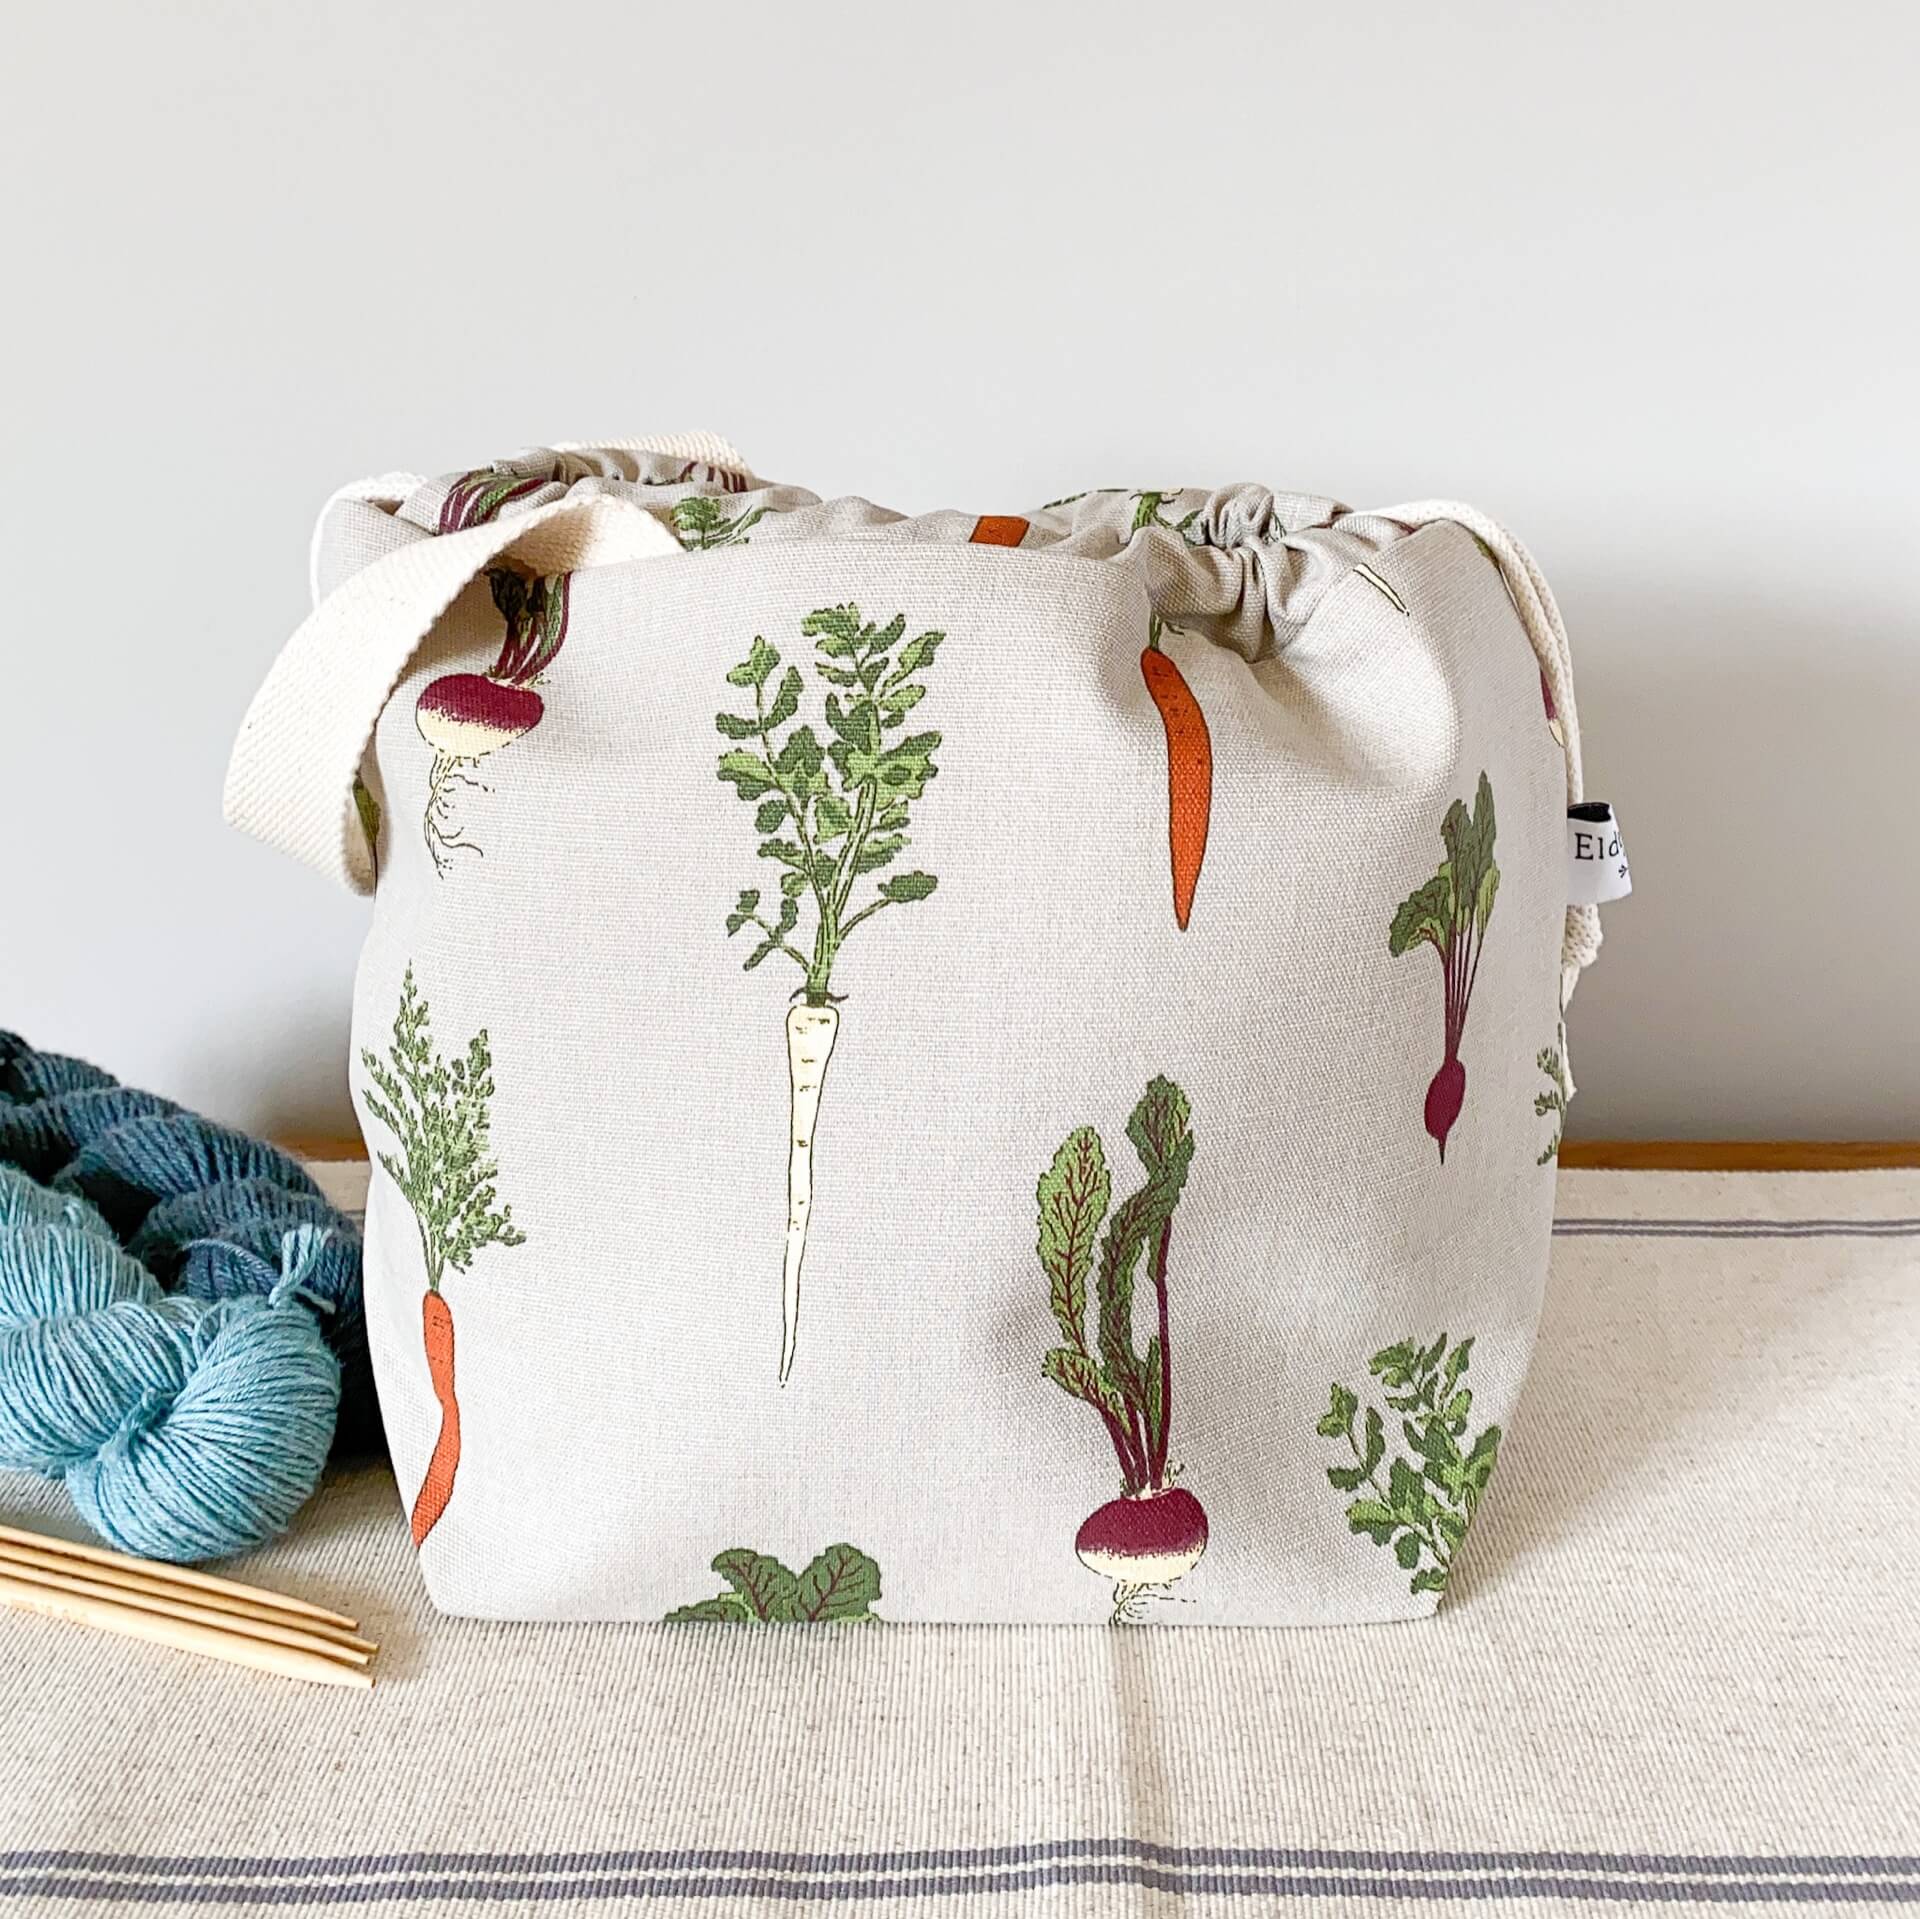 A project bag for knitting projects, made using a fabric showing off lots of home grown vegetables, sits on a table next to some skeins of yarn. The bag is pulled closed hiding its contents. 